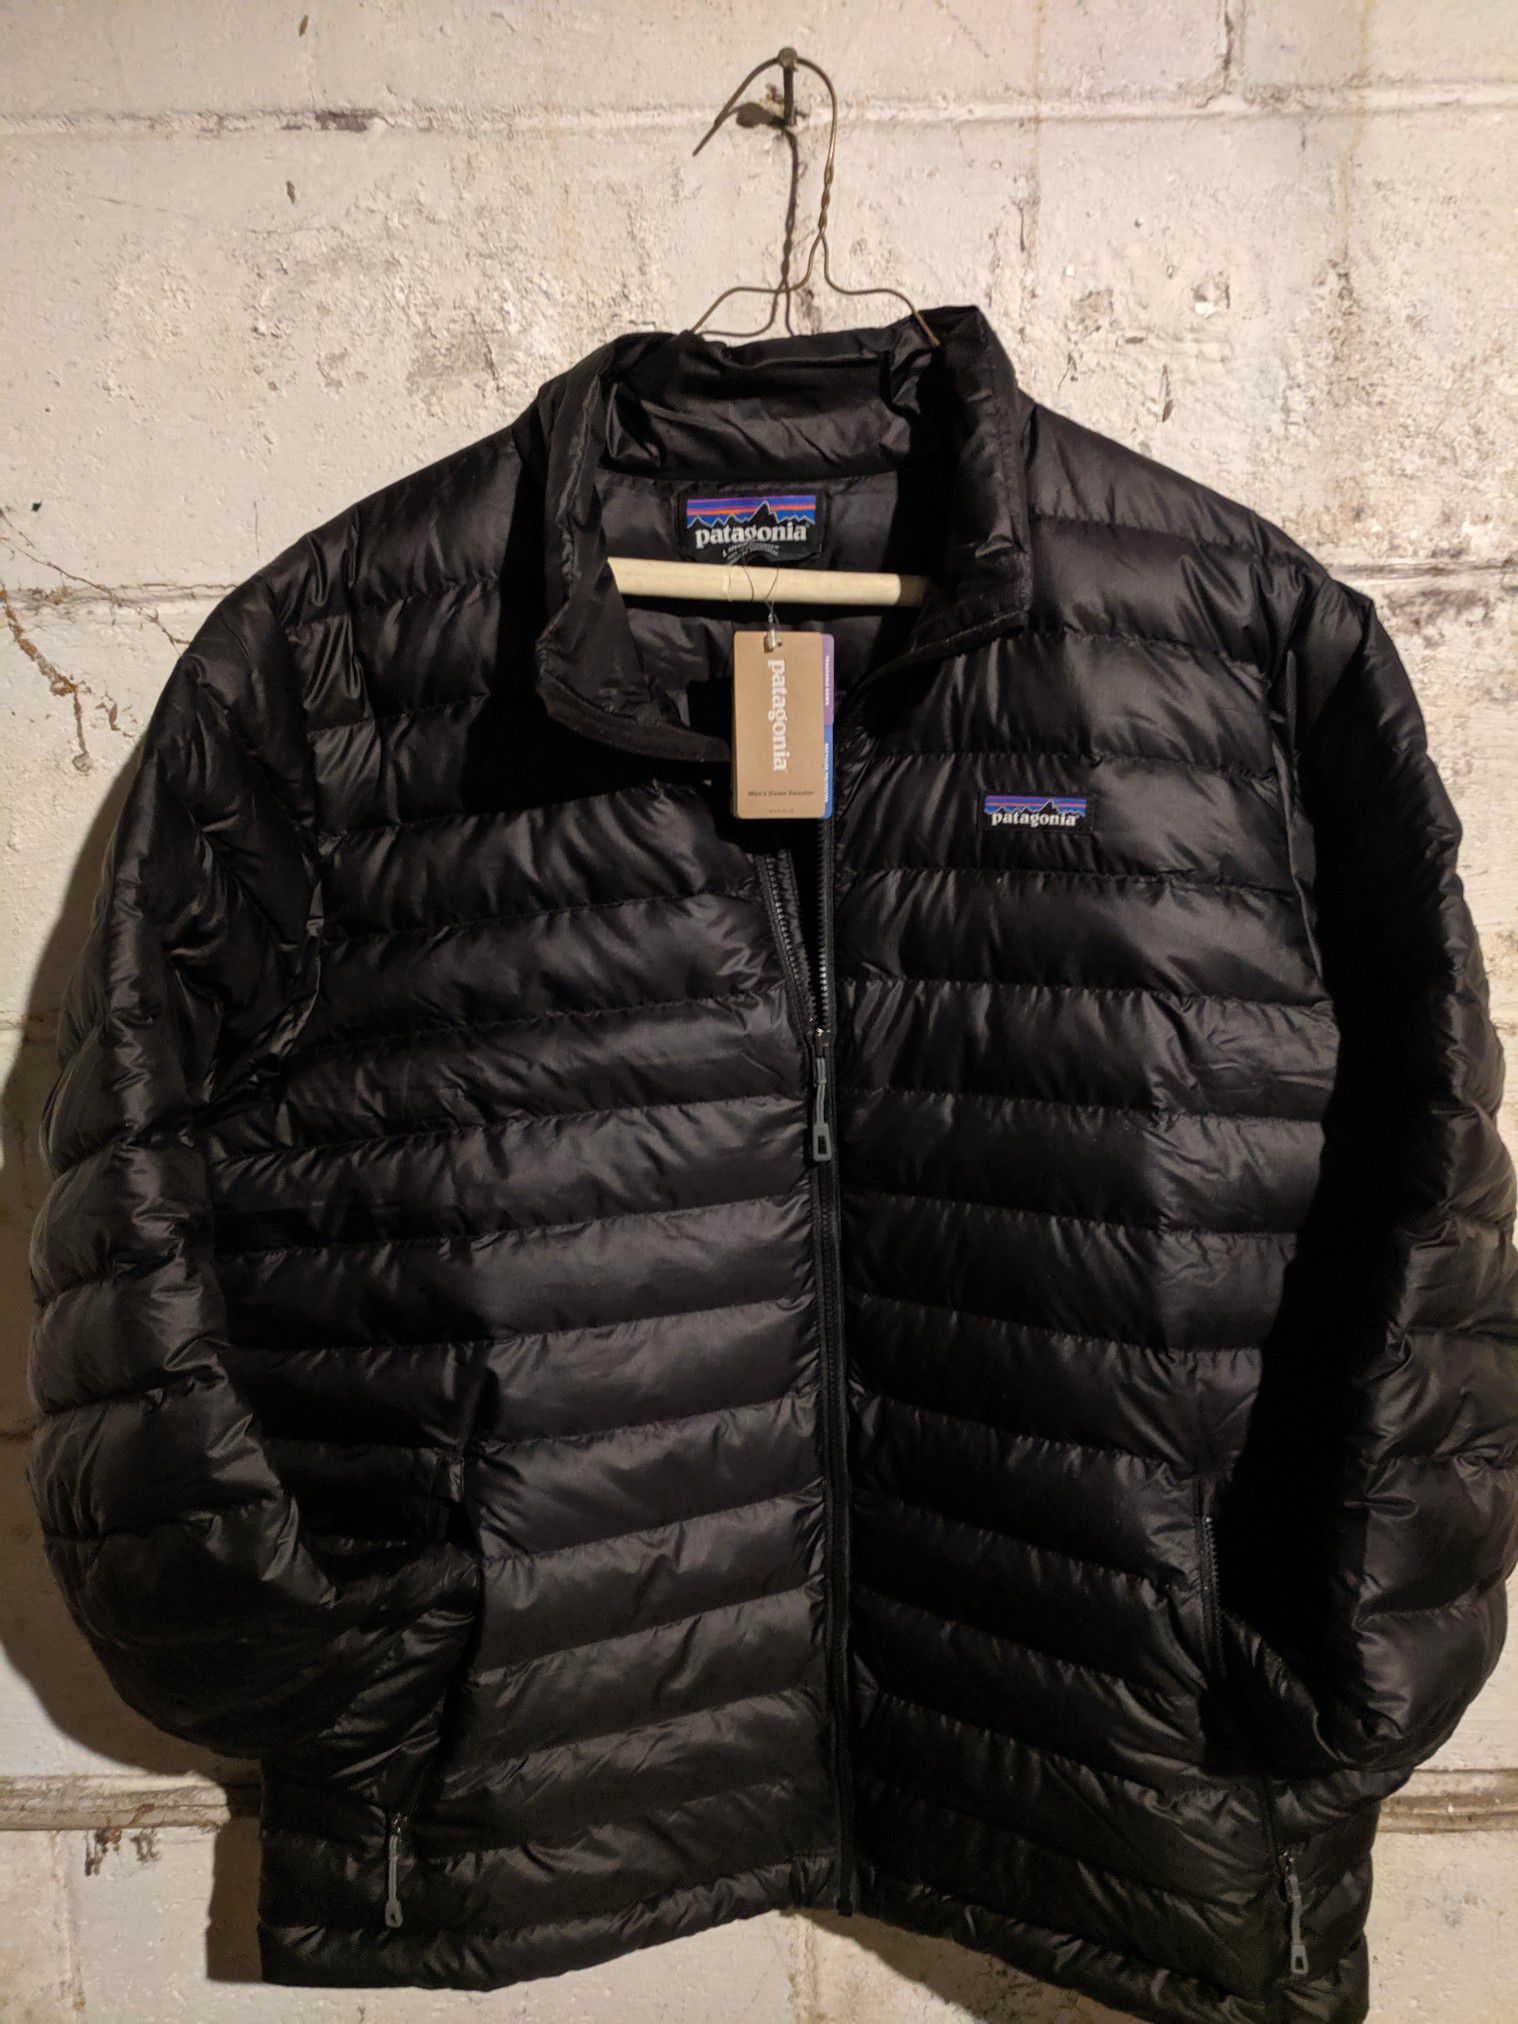 Patagonia jacket new with tags